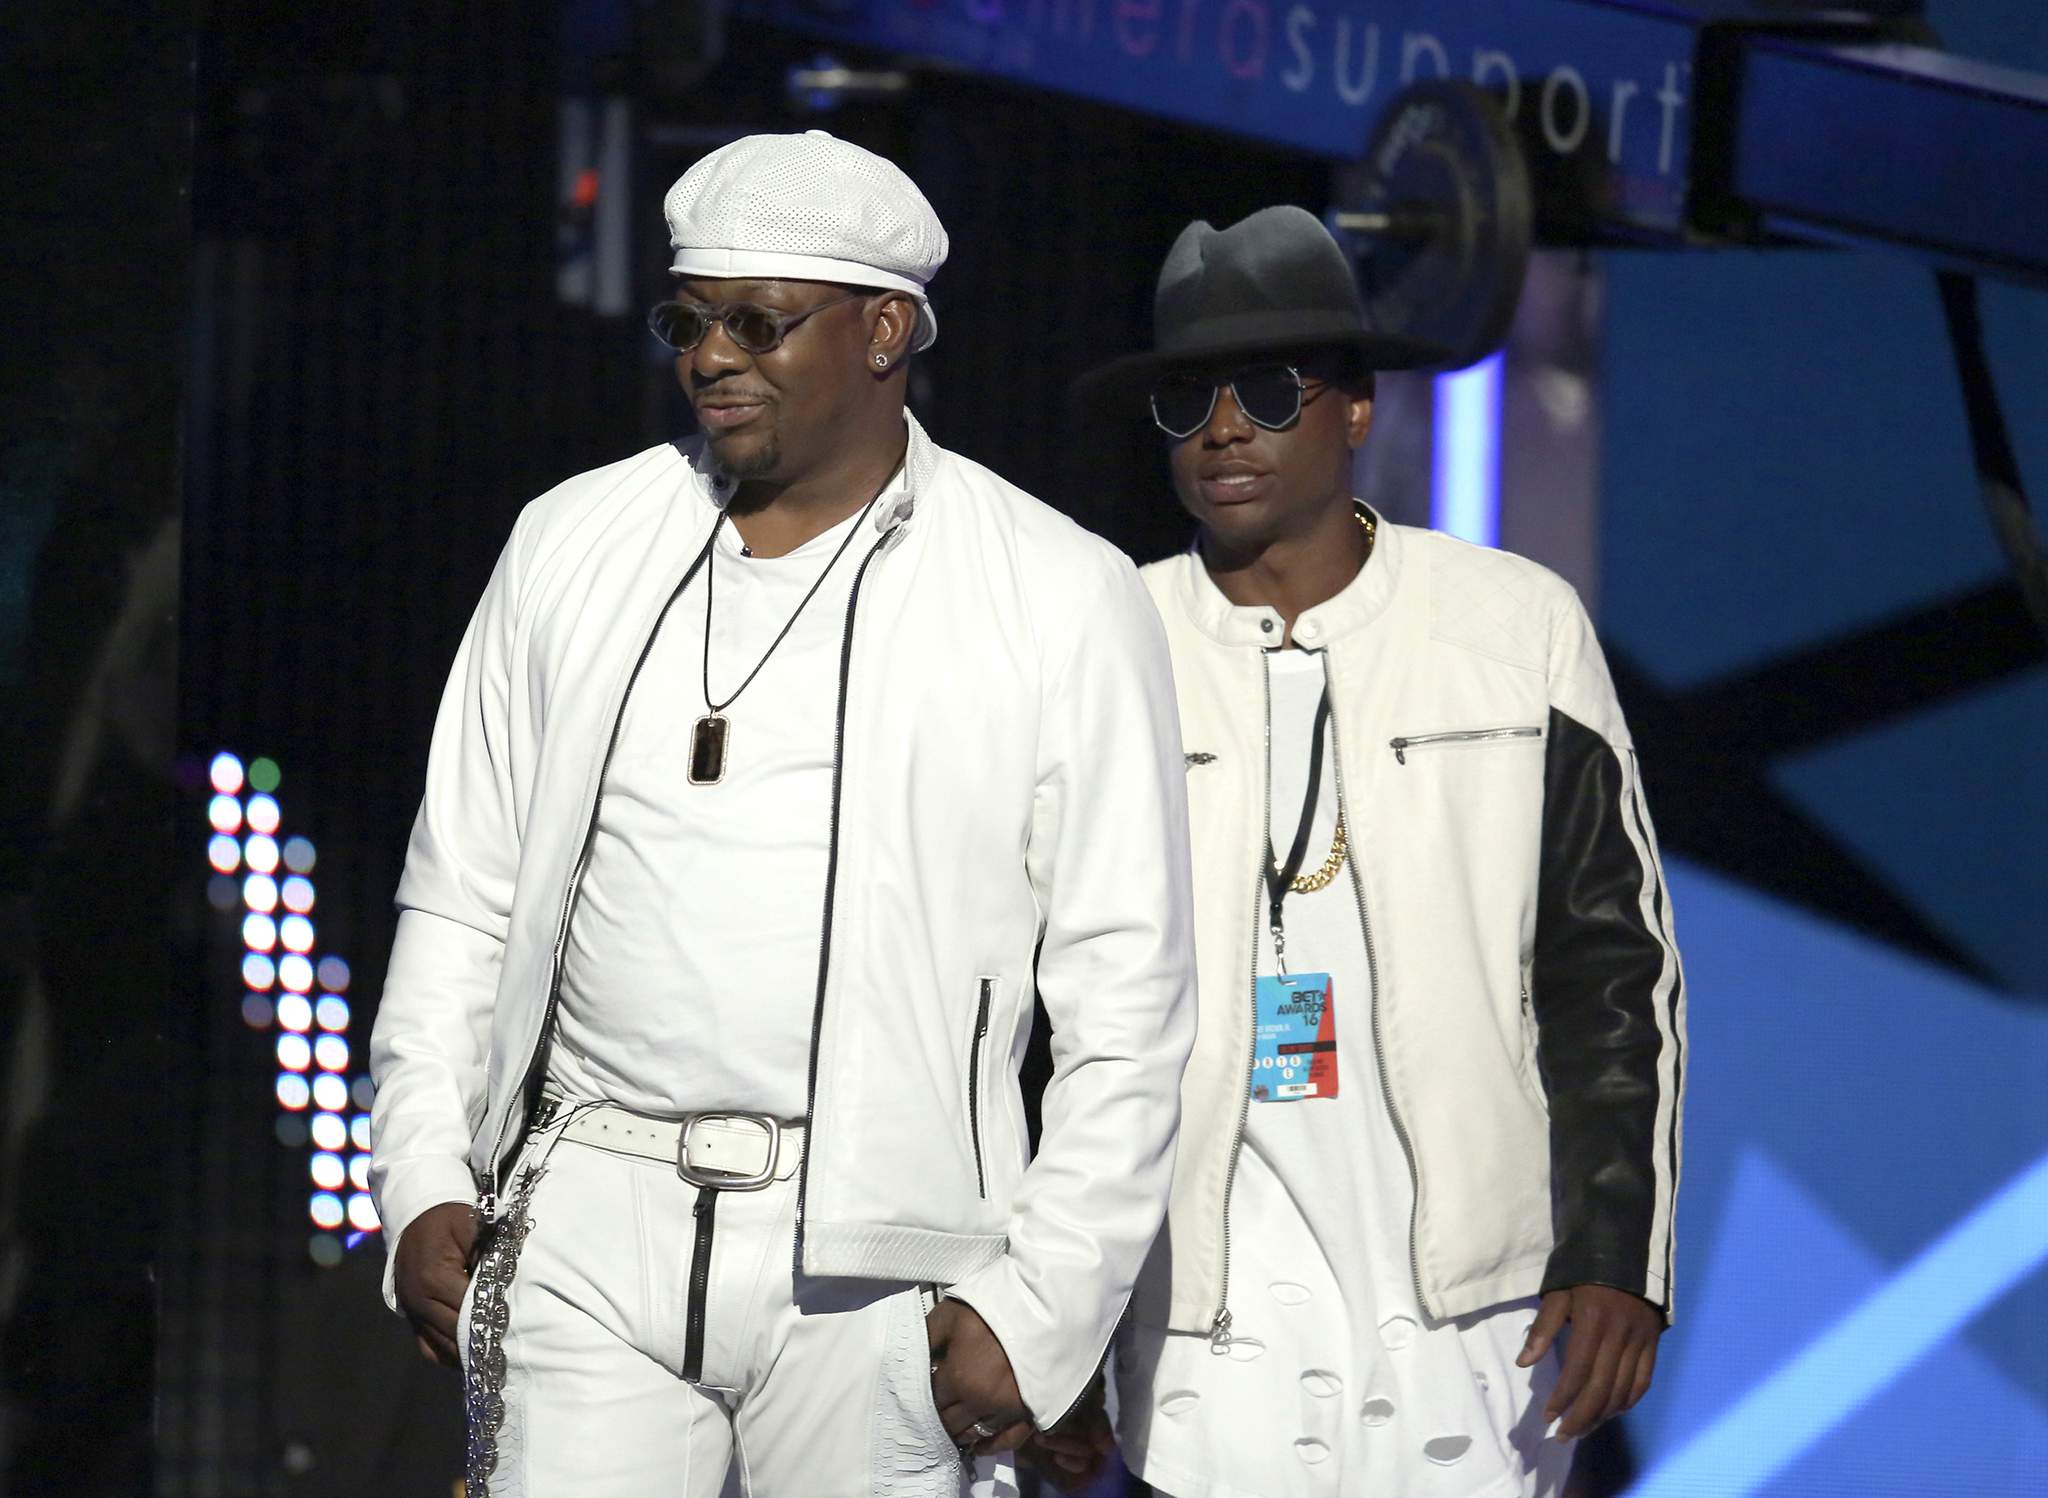 Autopsy report: Bobby Brown's son died from drugs, alcohol